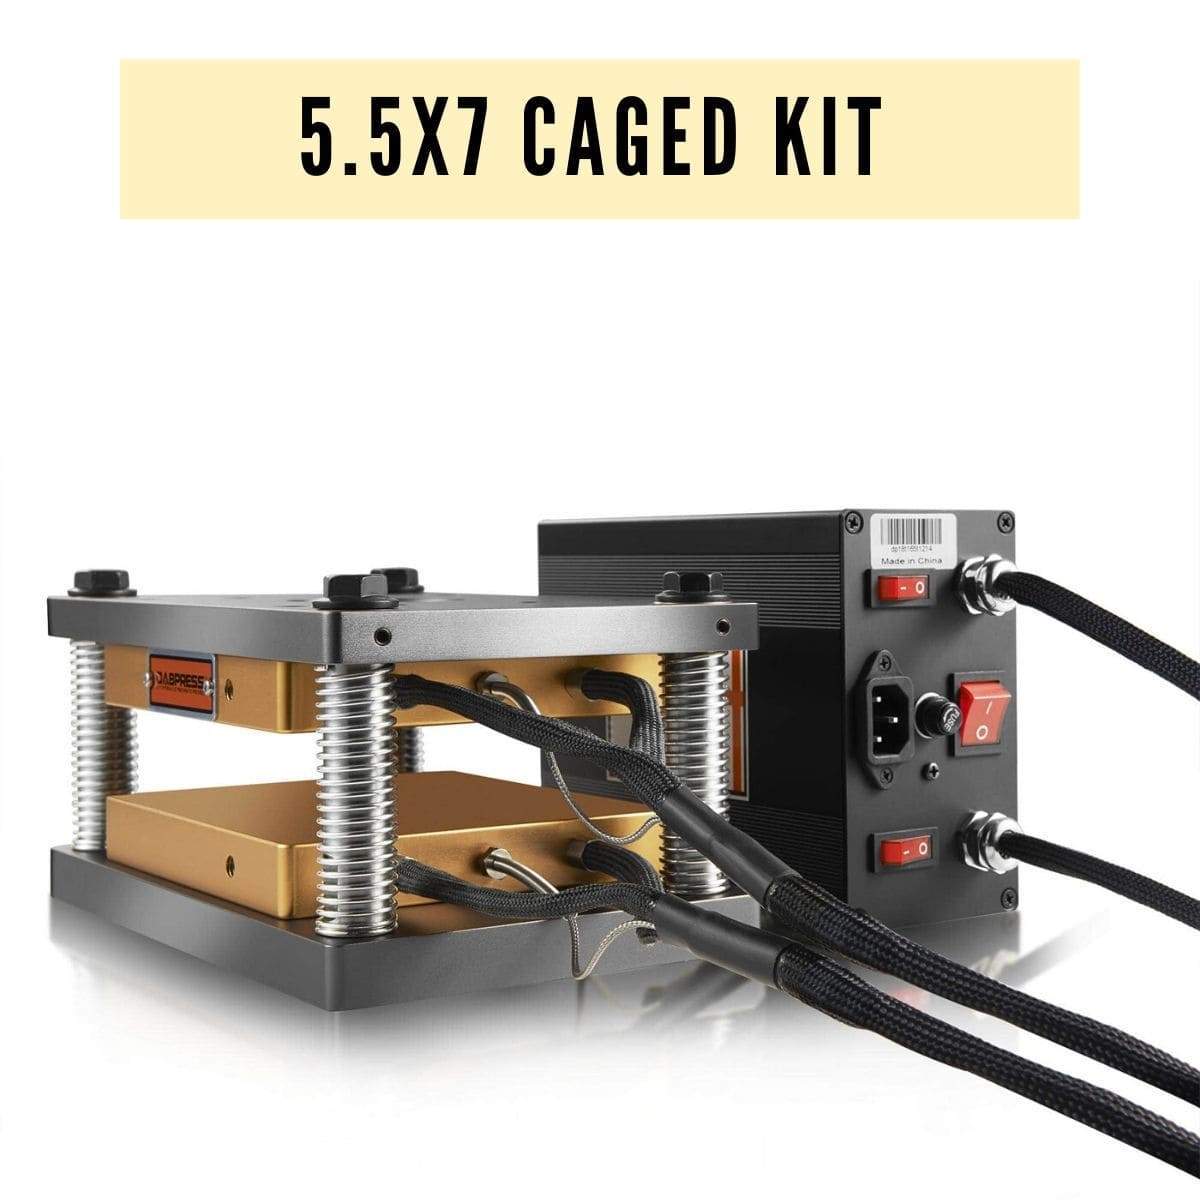 5.5x7 DIY Commercial Caged Press Plates Kit - Pairs It Well with A 20-30 Ton Hydraulic Press | Dabpress